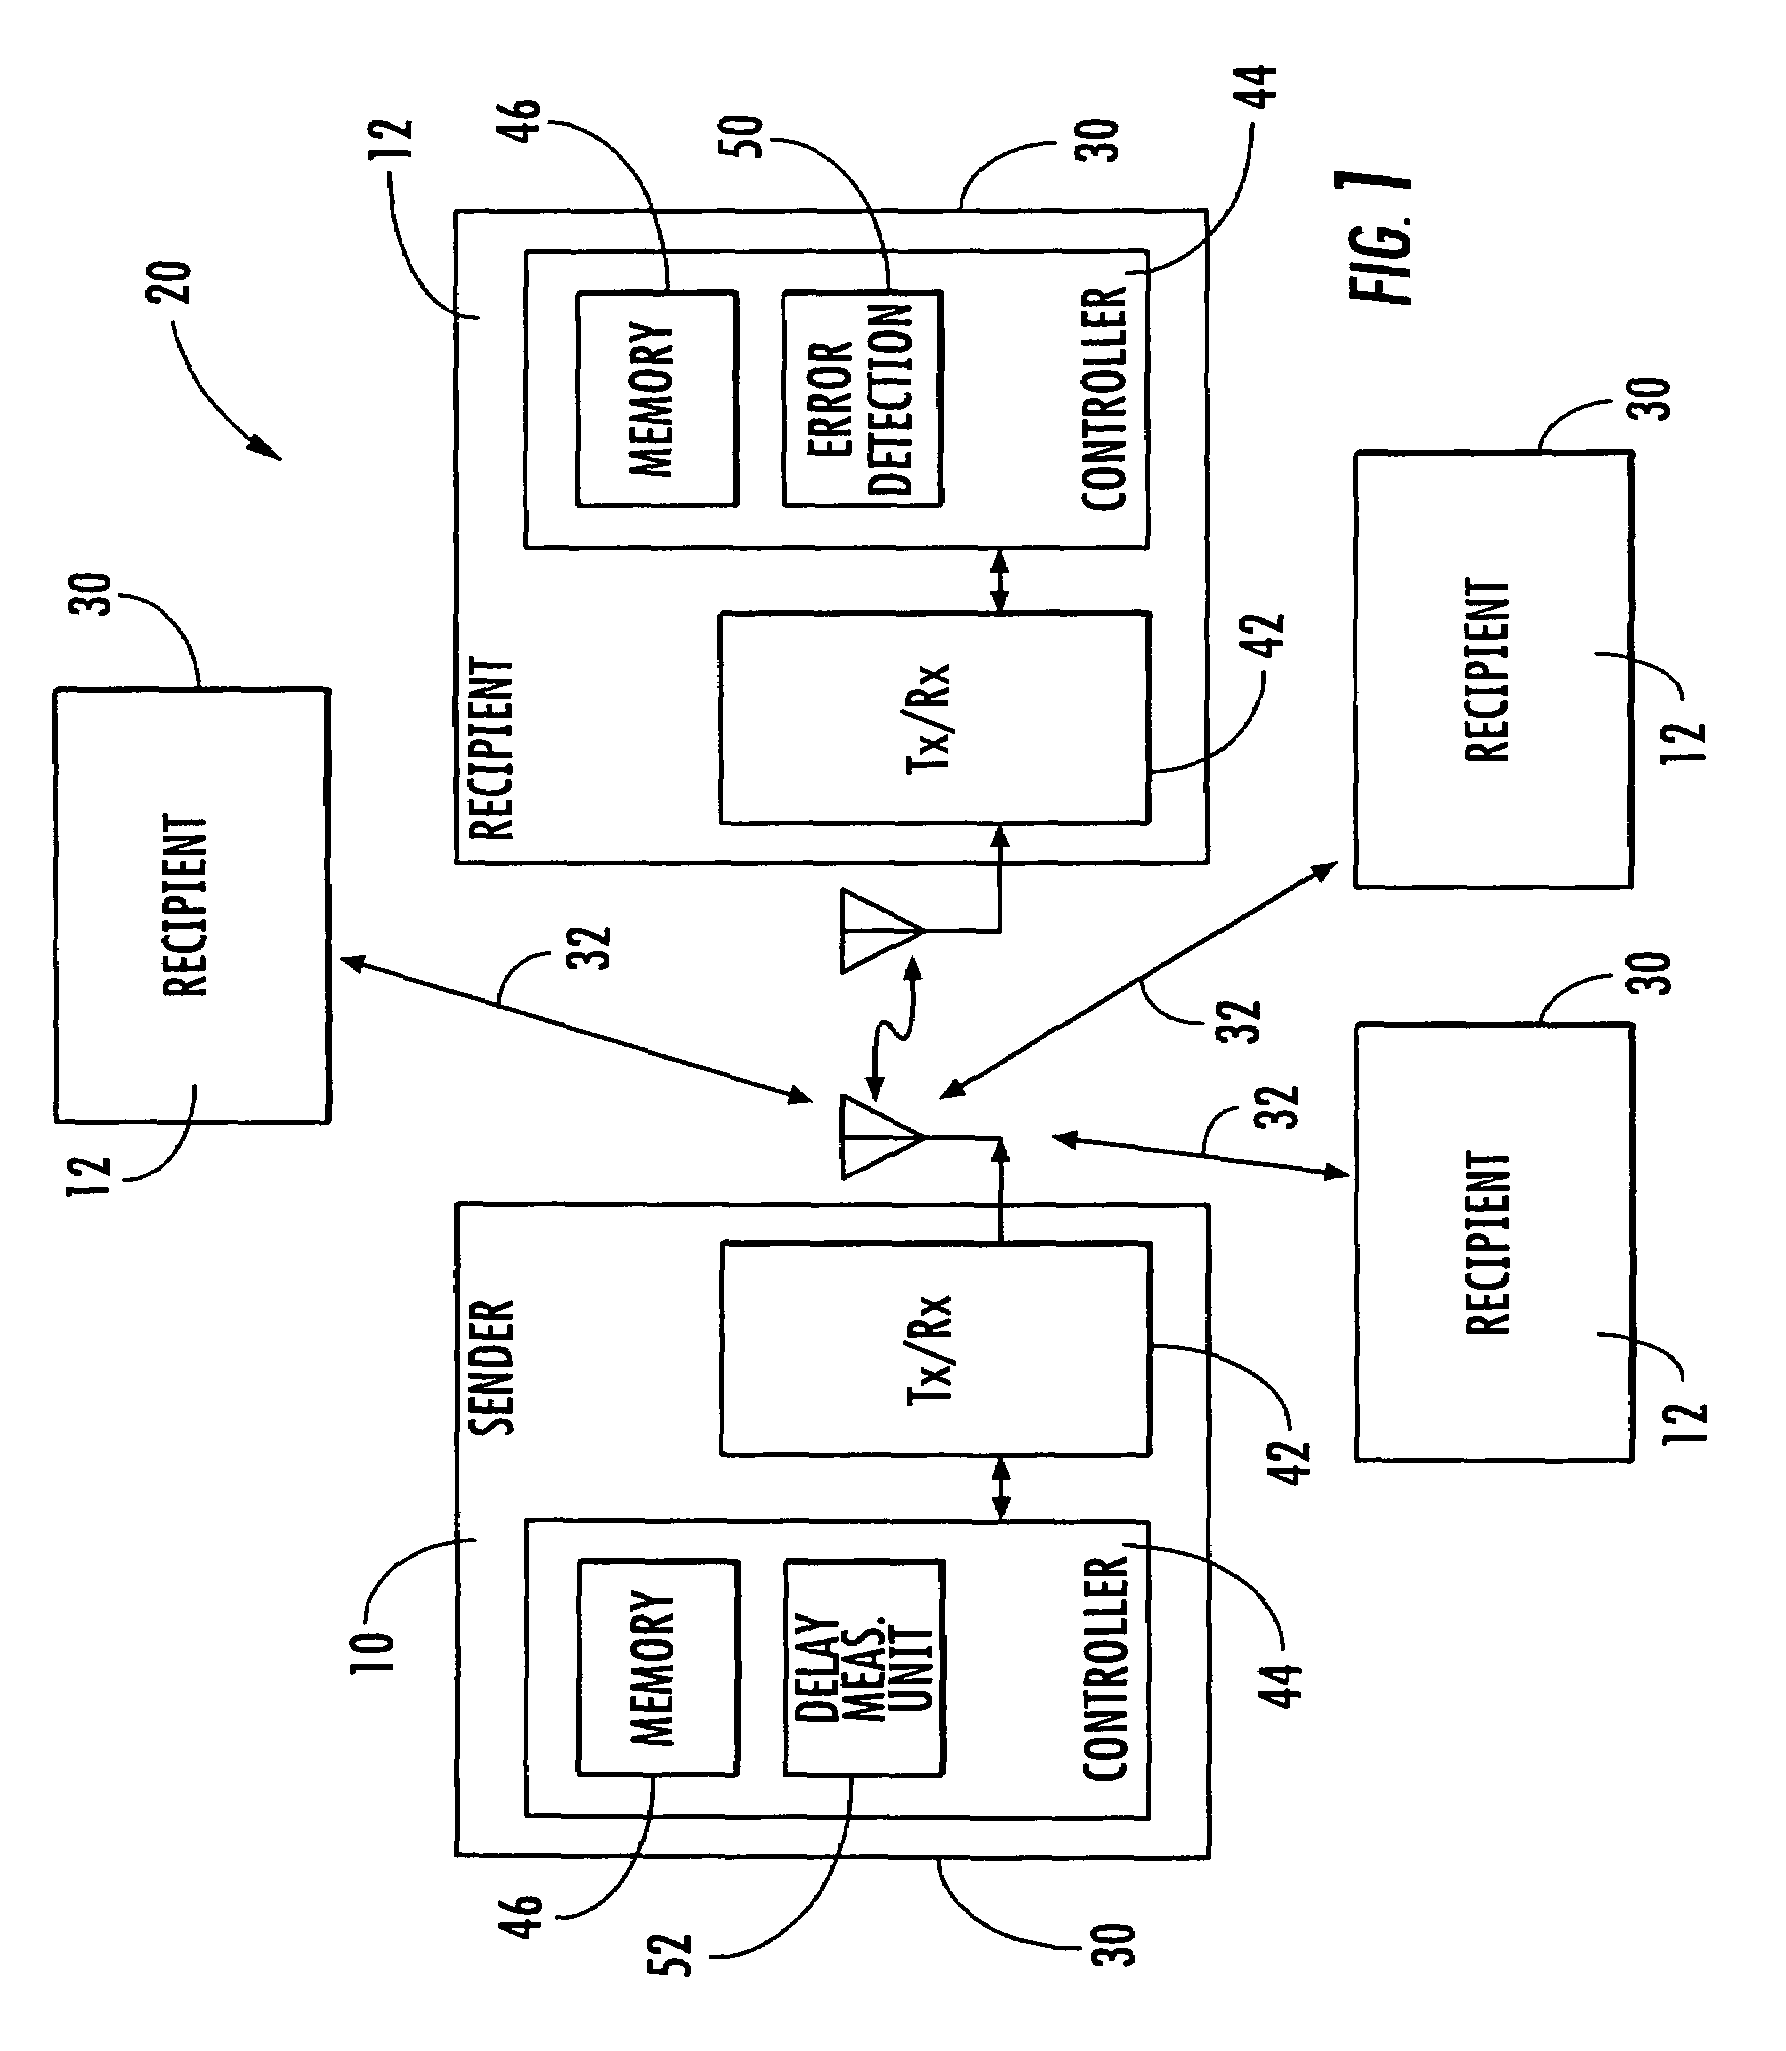 Multicast data communication method and network